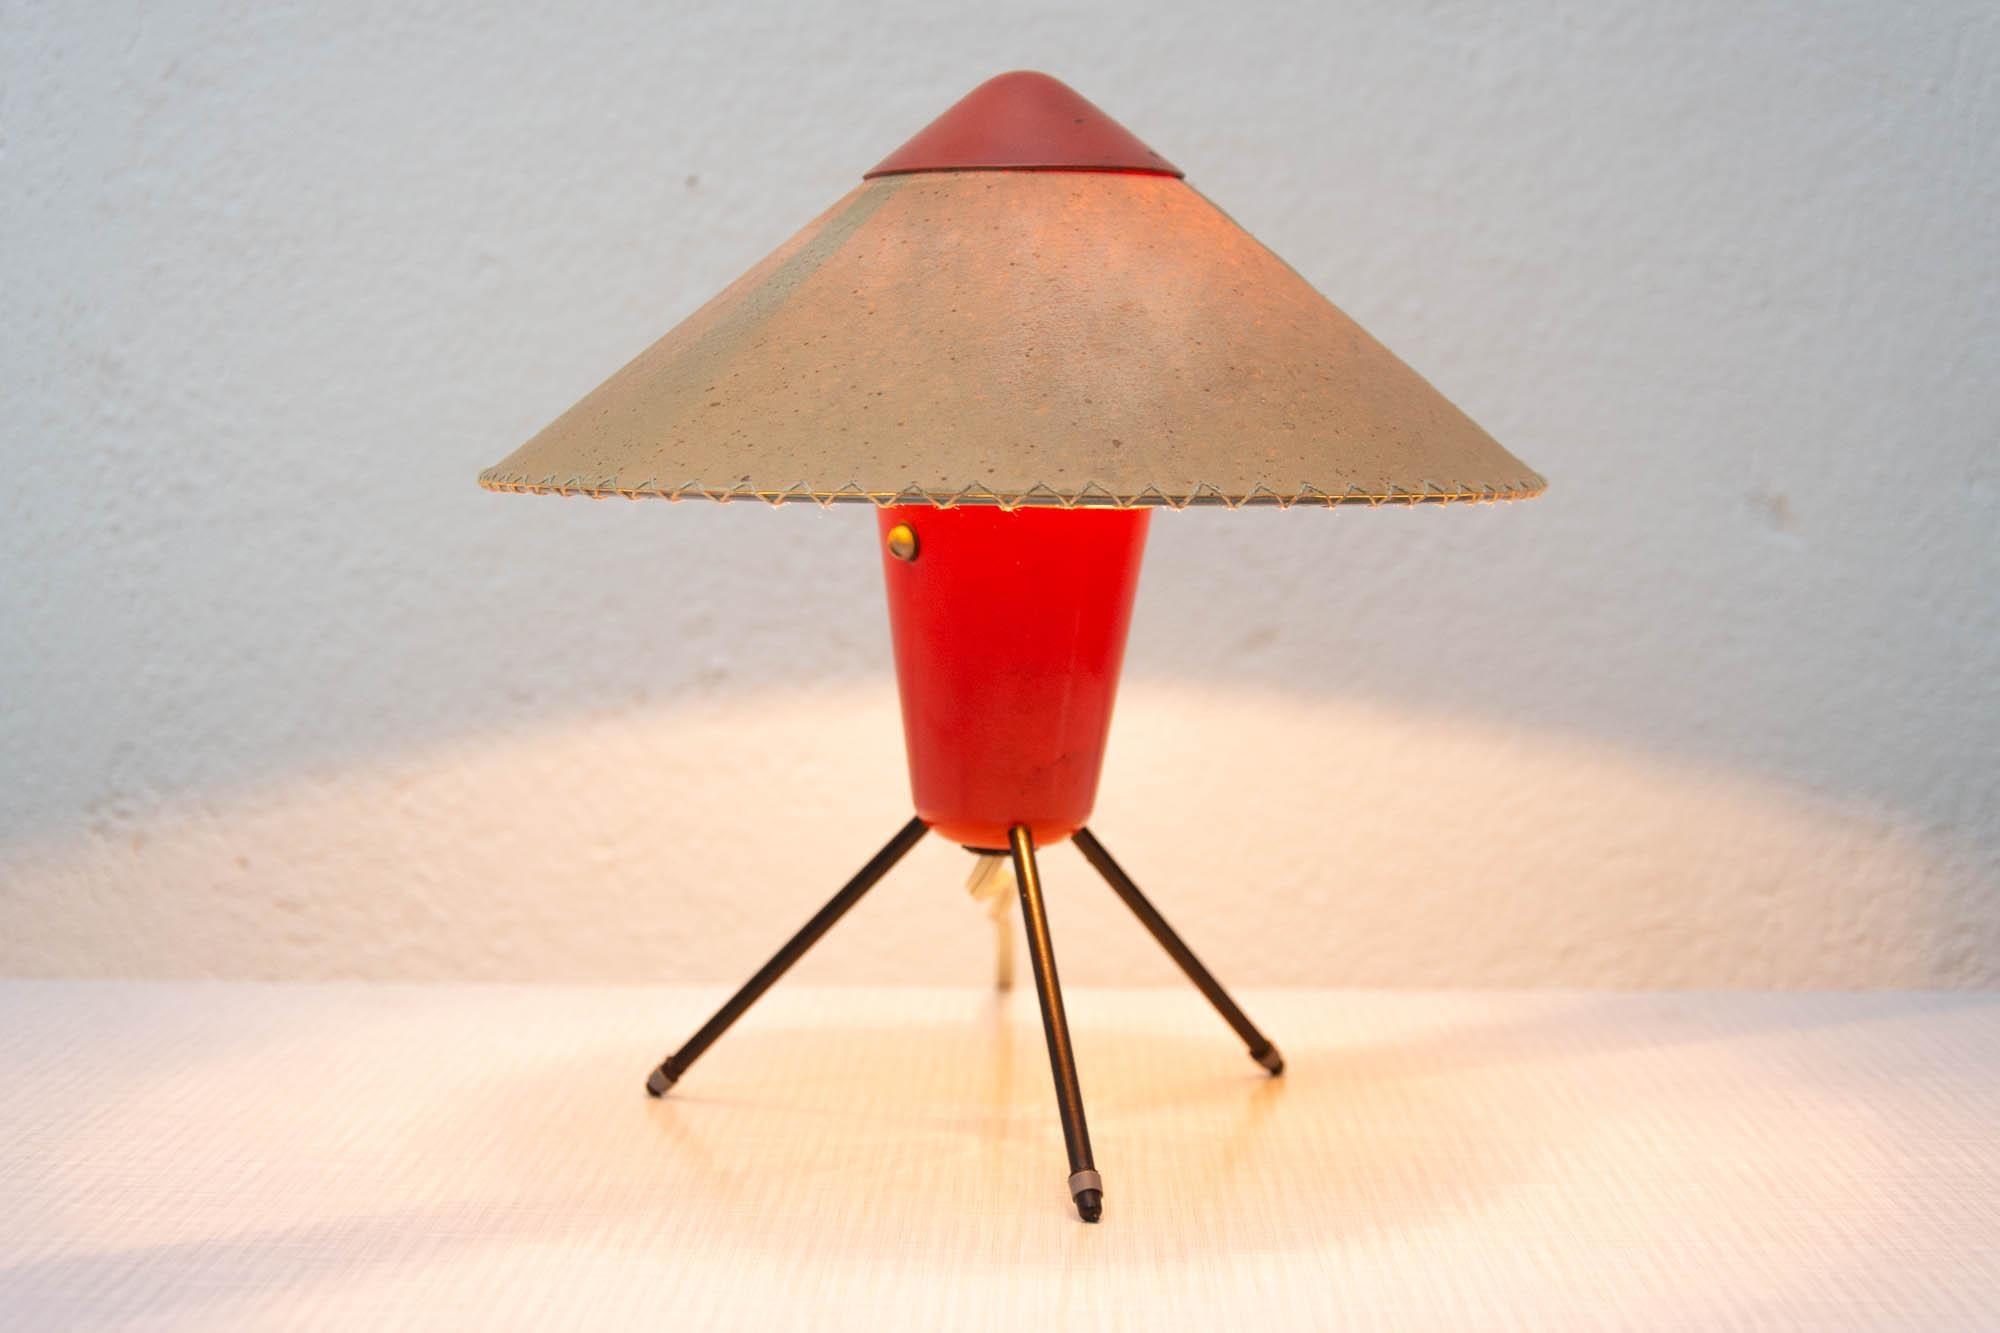 This desk was designed by Helena Frantova and produced by Okolo in the 1950 in the former Czechoslovakia.

This Helena Frantova tripod table lamp exists in several colours; green, blue, yellow, red… This table lamp exists in several variations.